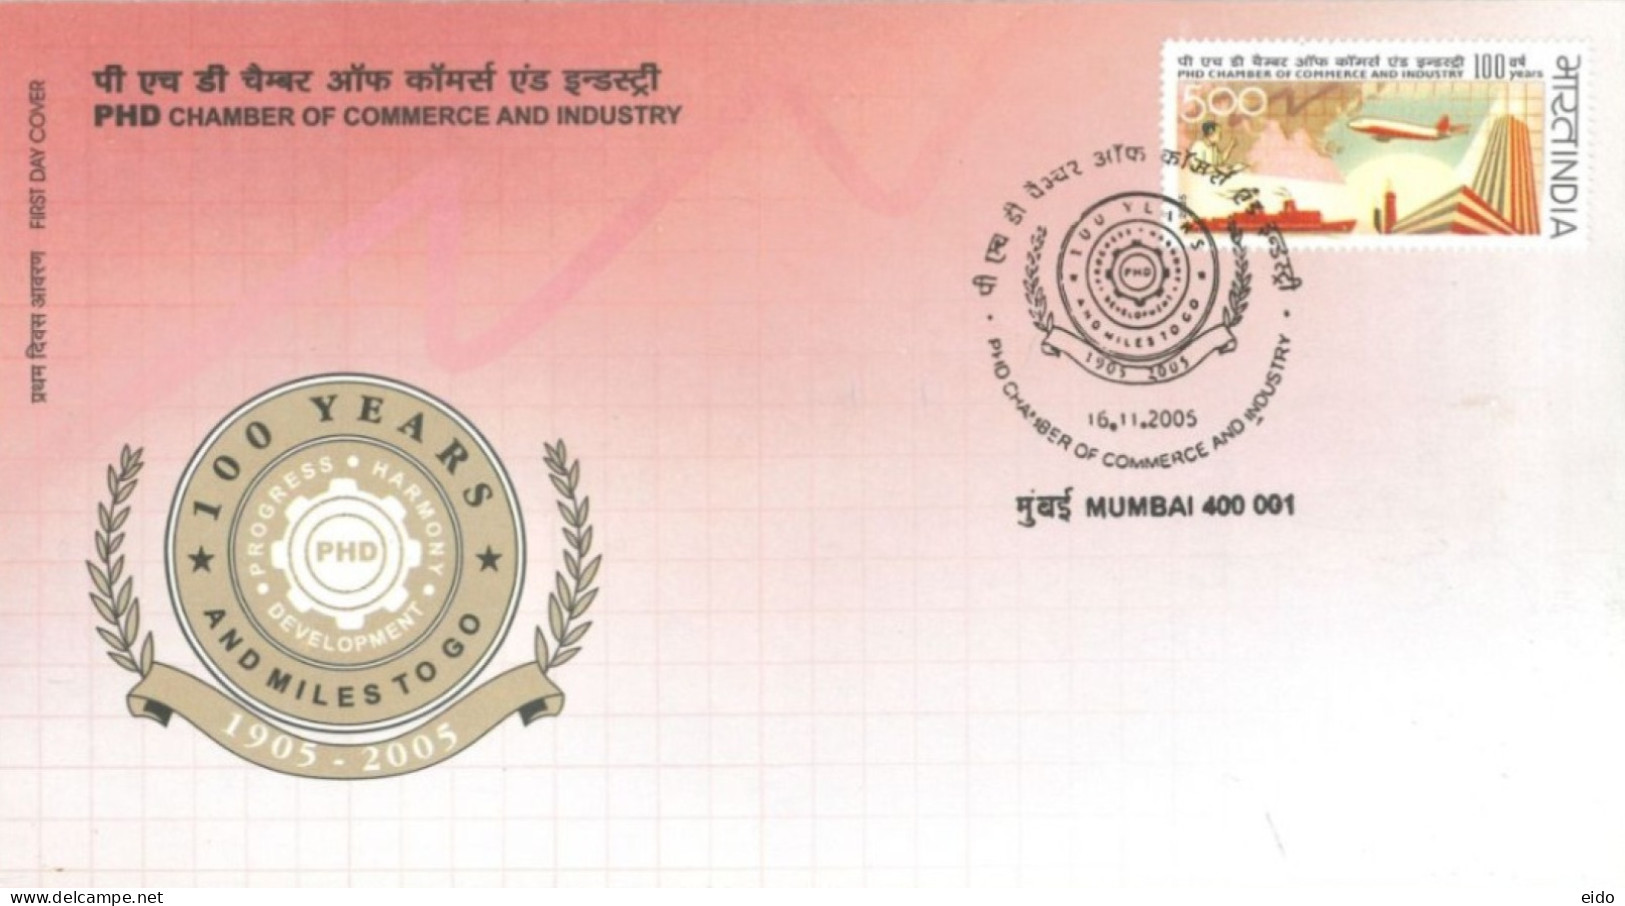 INDIA - 2005 - FDC STAMP OF PHD CHAMBER OF COMMERCE AND INDUSTRY. - Briefe U. Dokumente